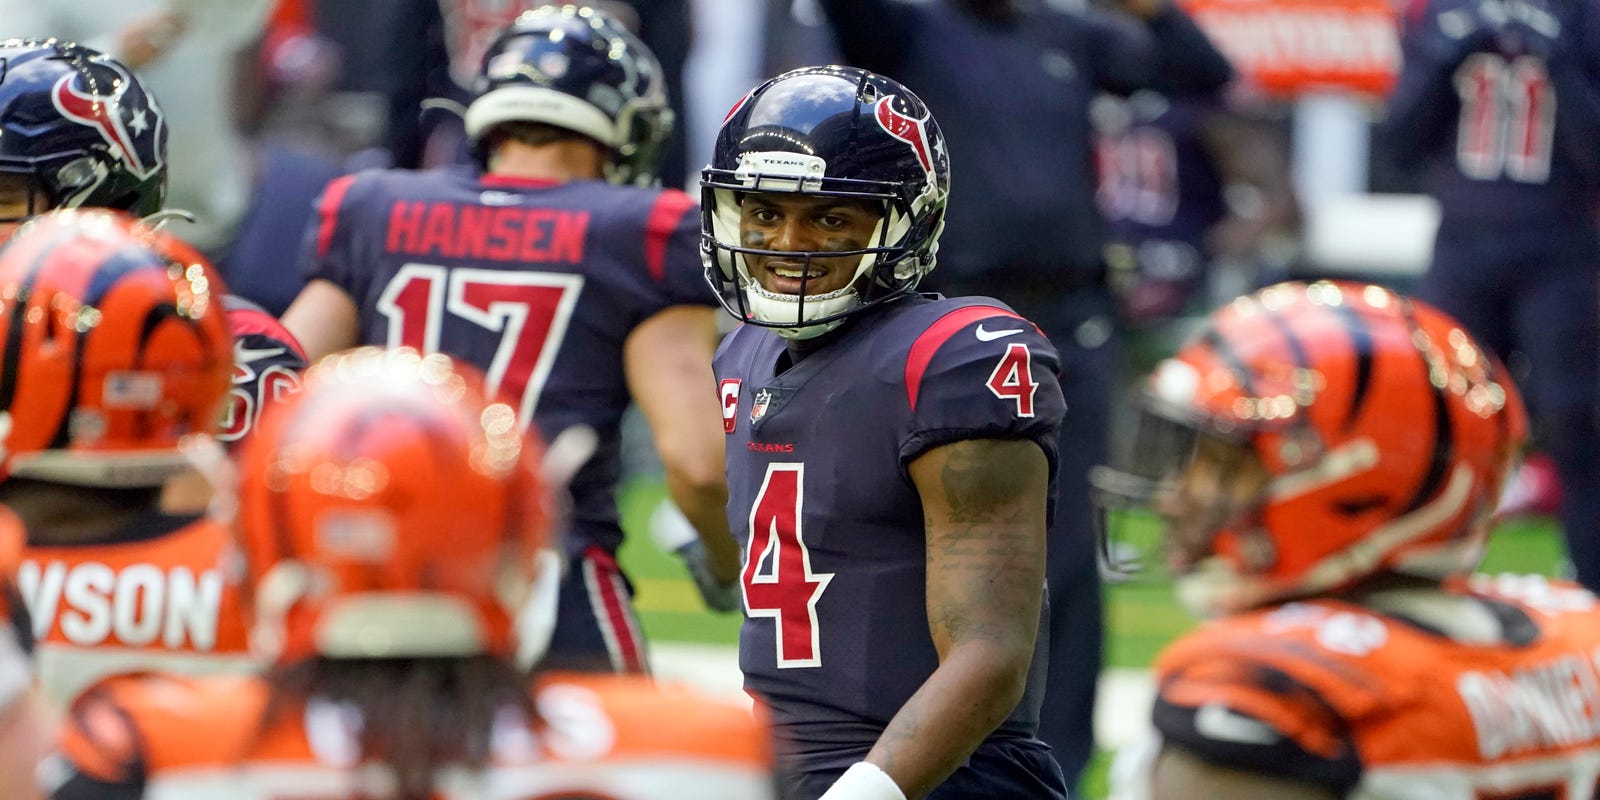 Bass:  What if Deshaun Watson was the best choice for the Bengals? Would you embrace it?